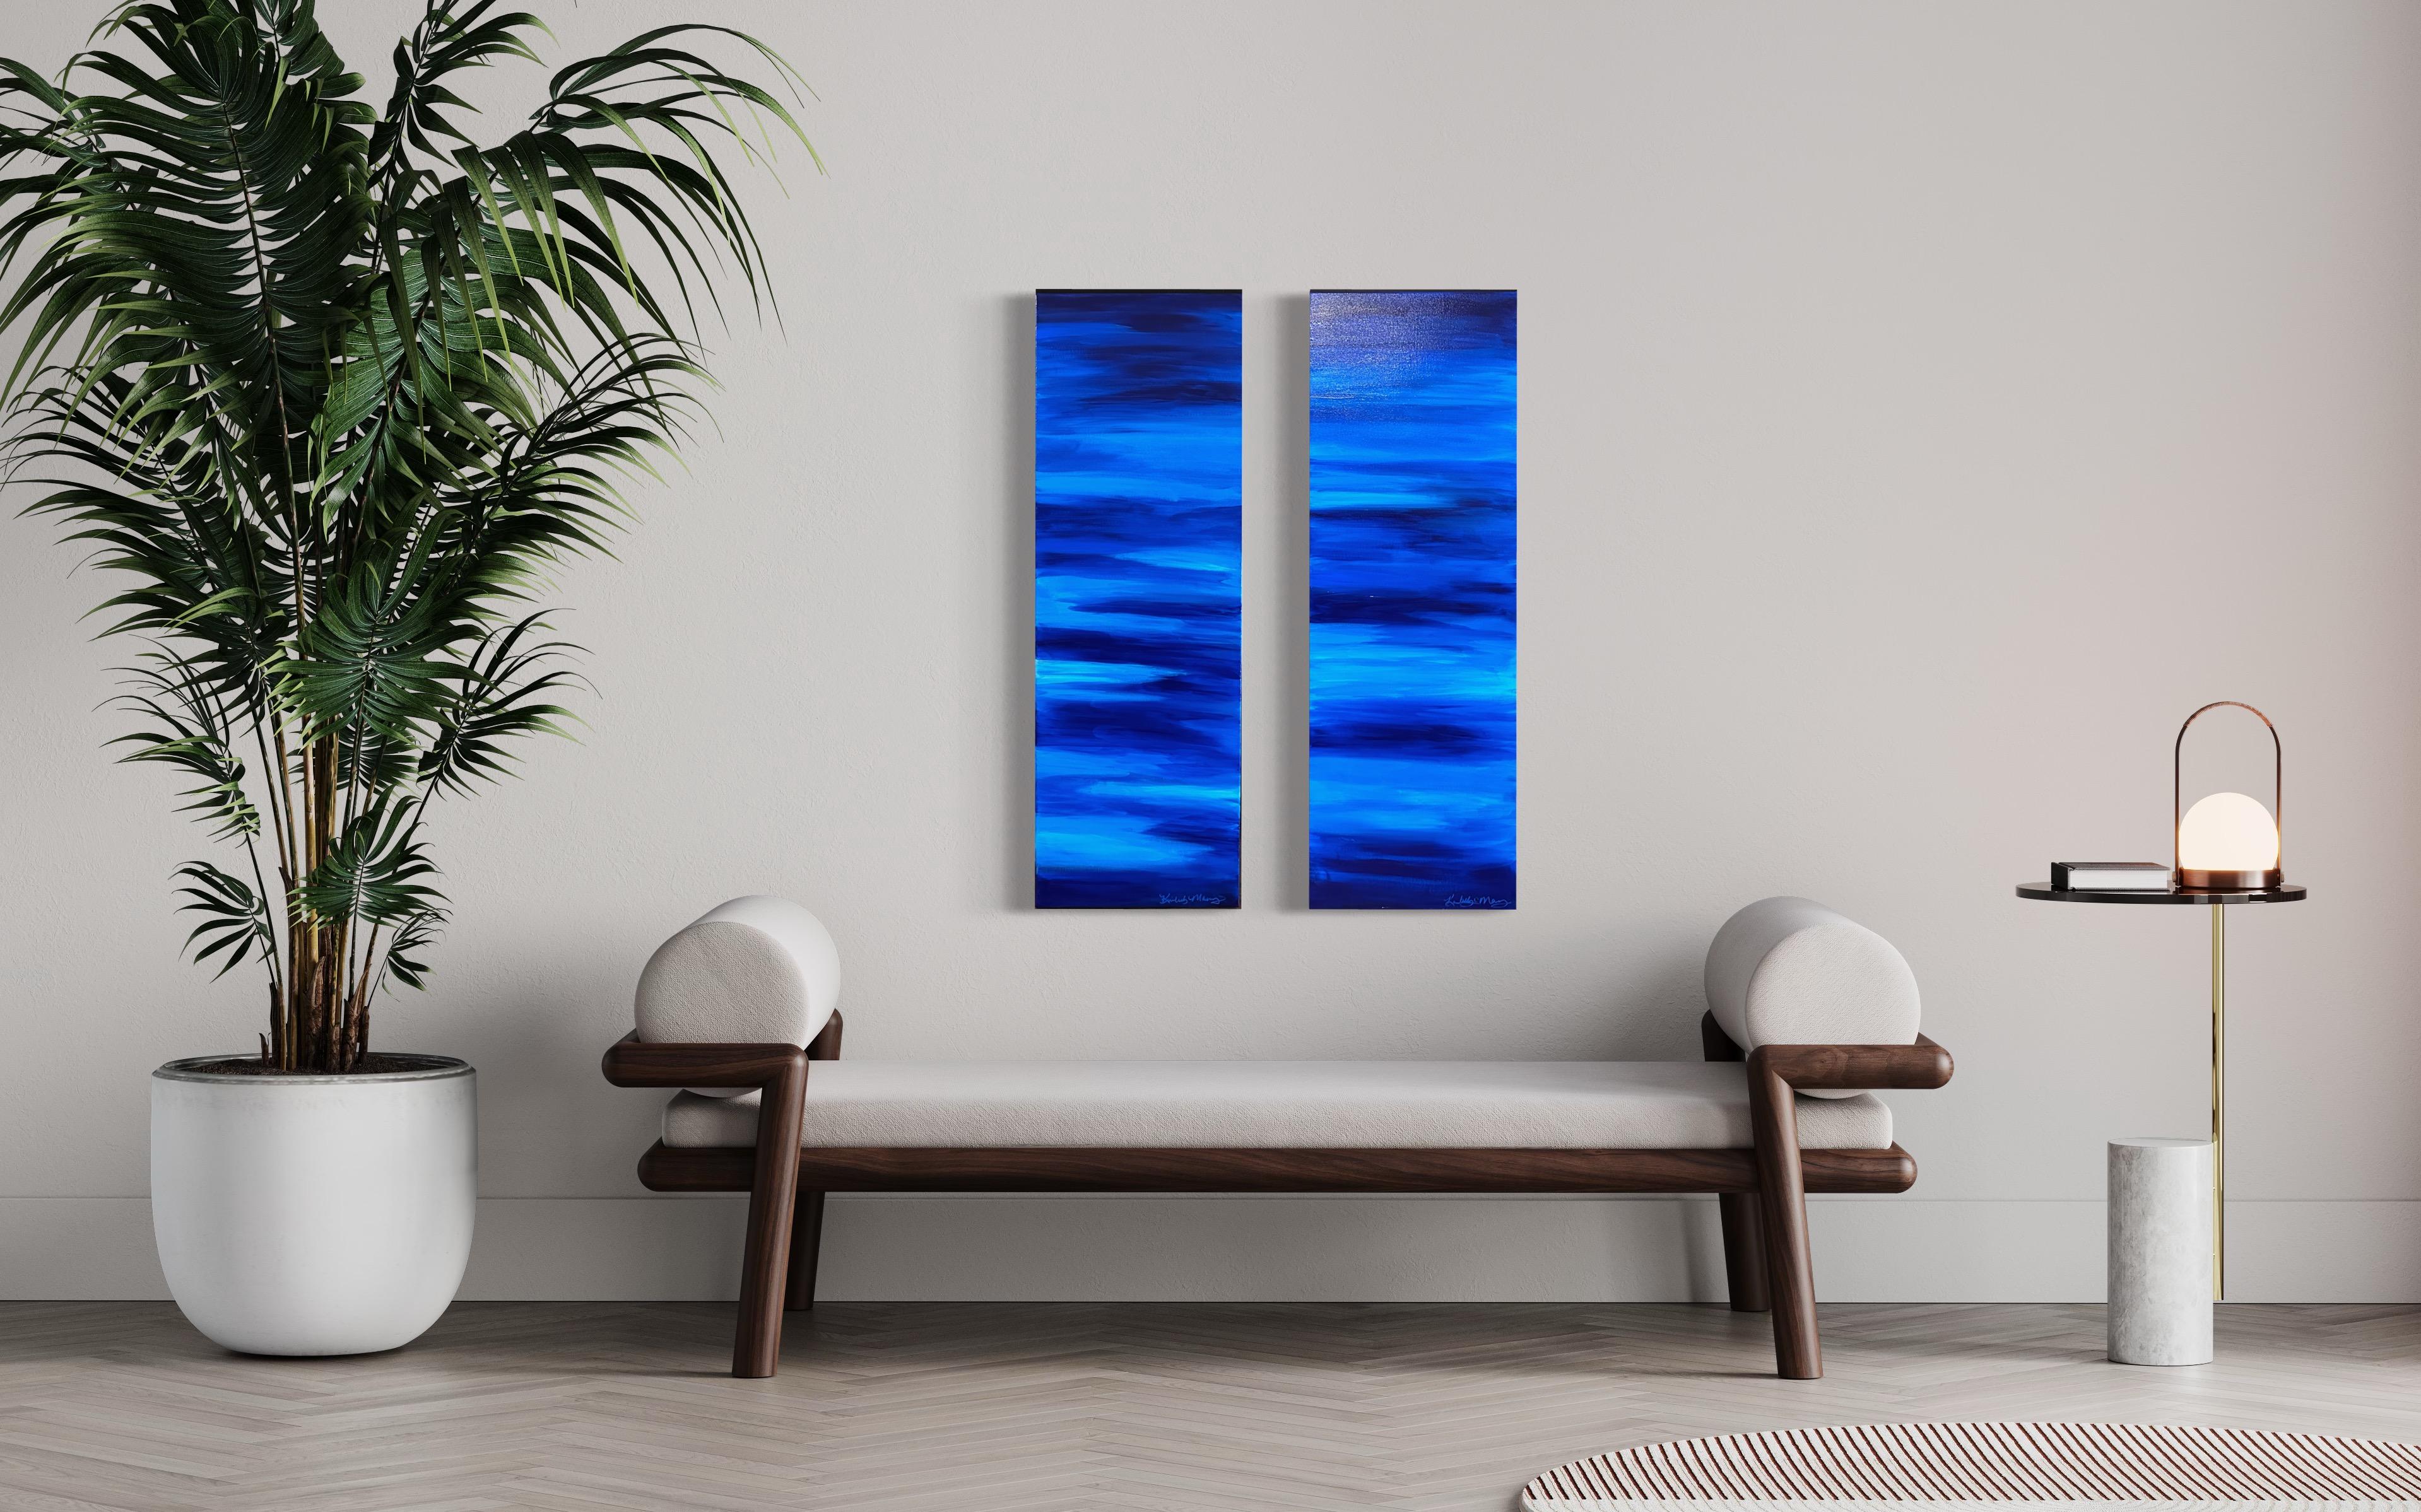 Blue Horizon #2 (Blue, Abstract, Water, Landscape) - Abstract Expressionist Painting by Kimberly Marney